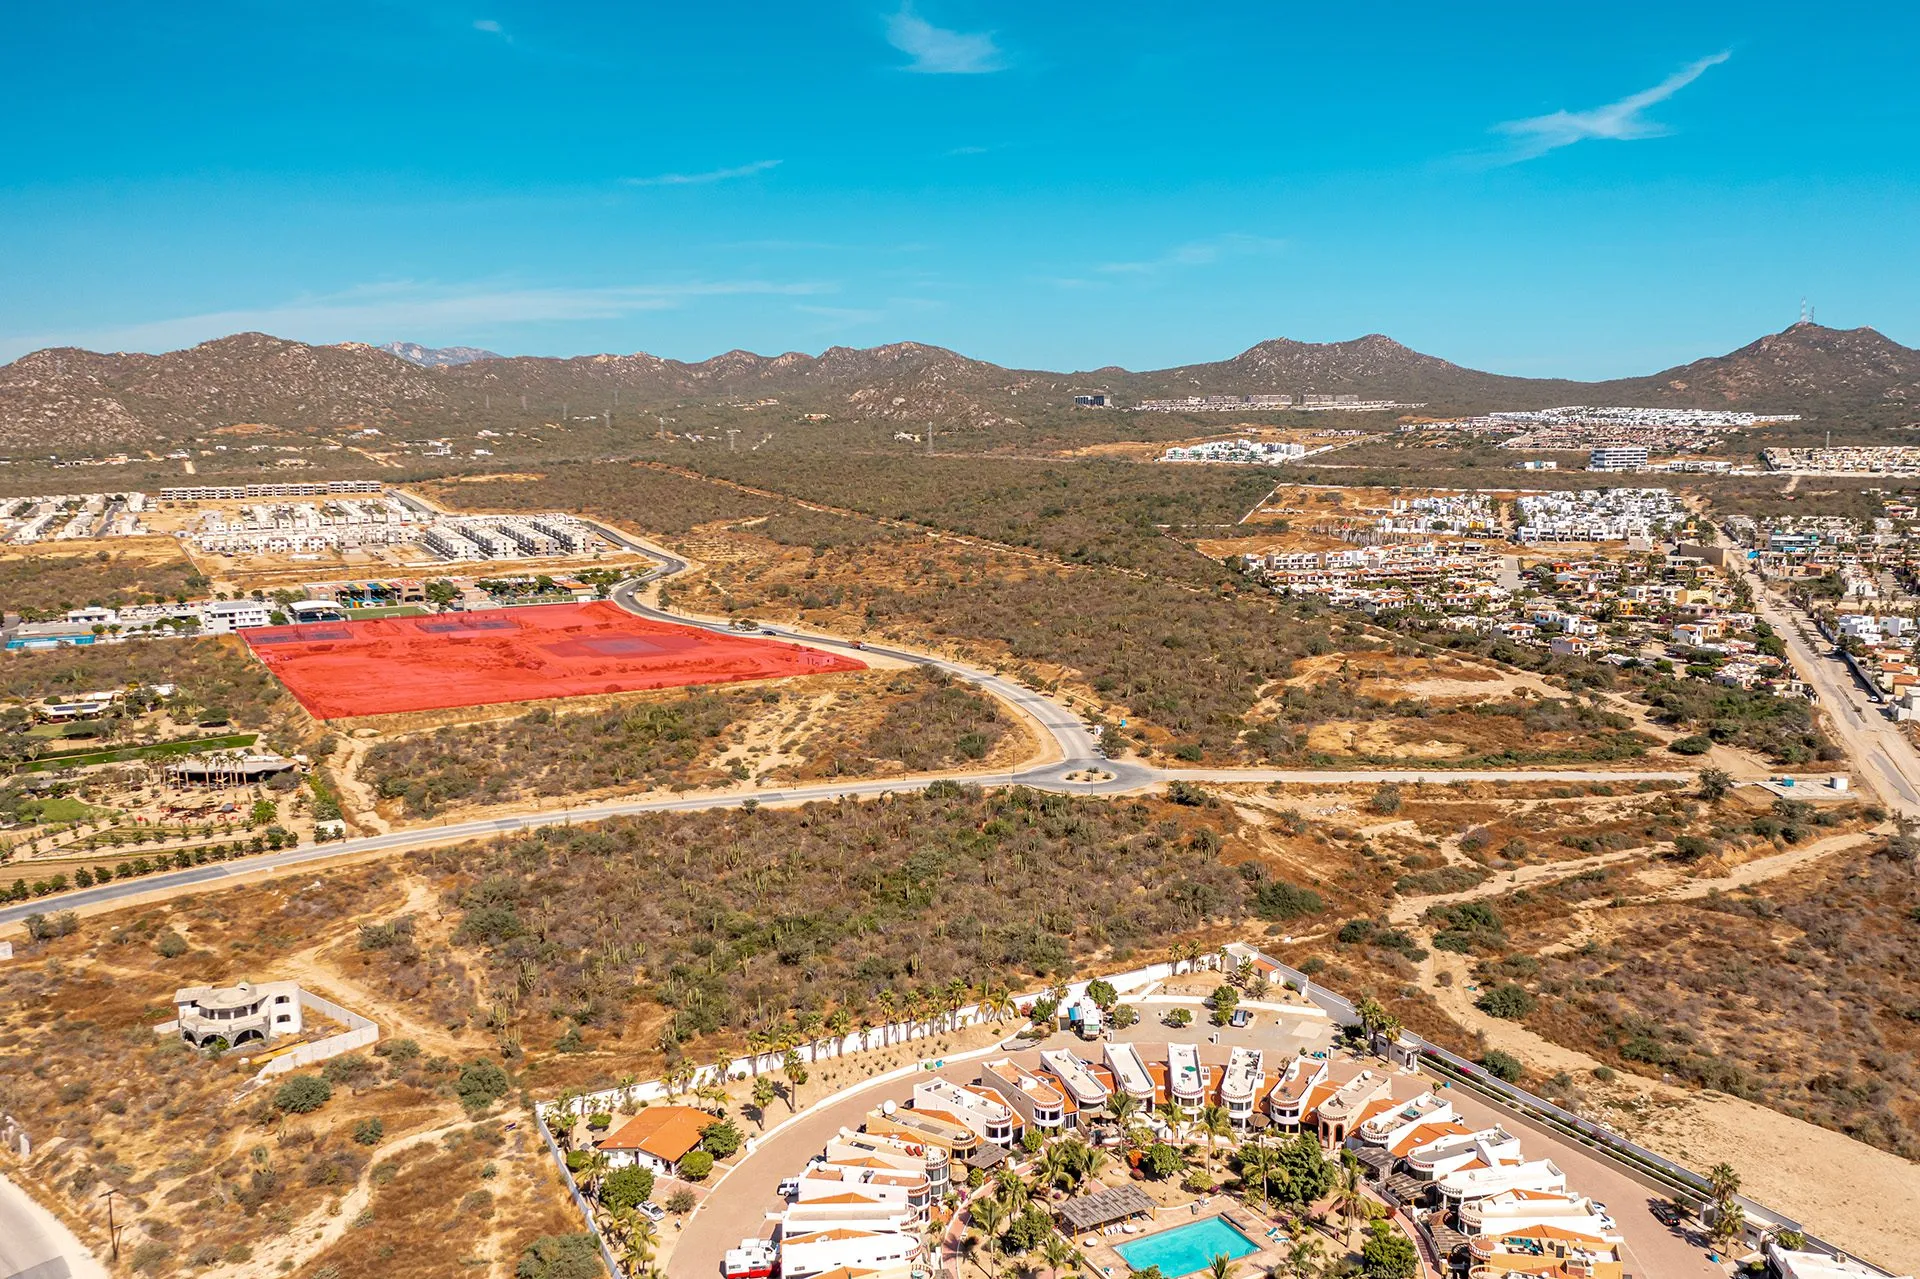 Lot IV, is an excellent option for comercial or residential development. Right below "Del Mar International School" this 10.3 acre parcel is located inside one of the most popular communities in Los Cabos.